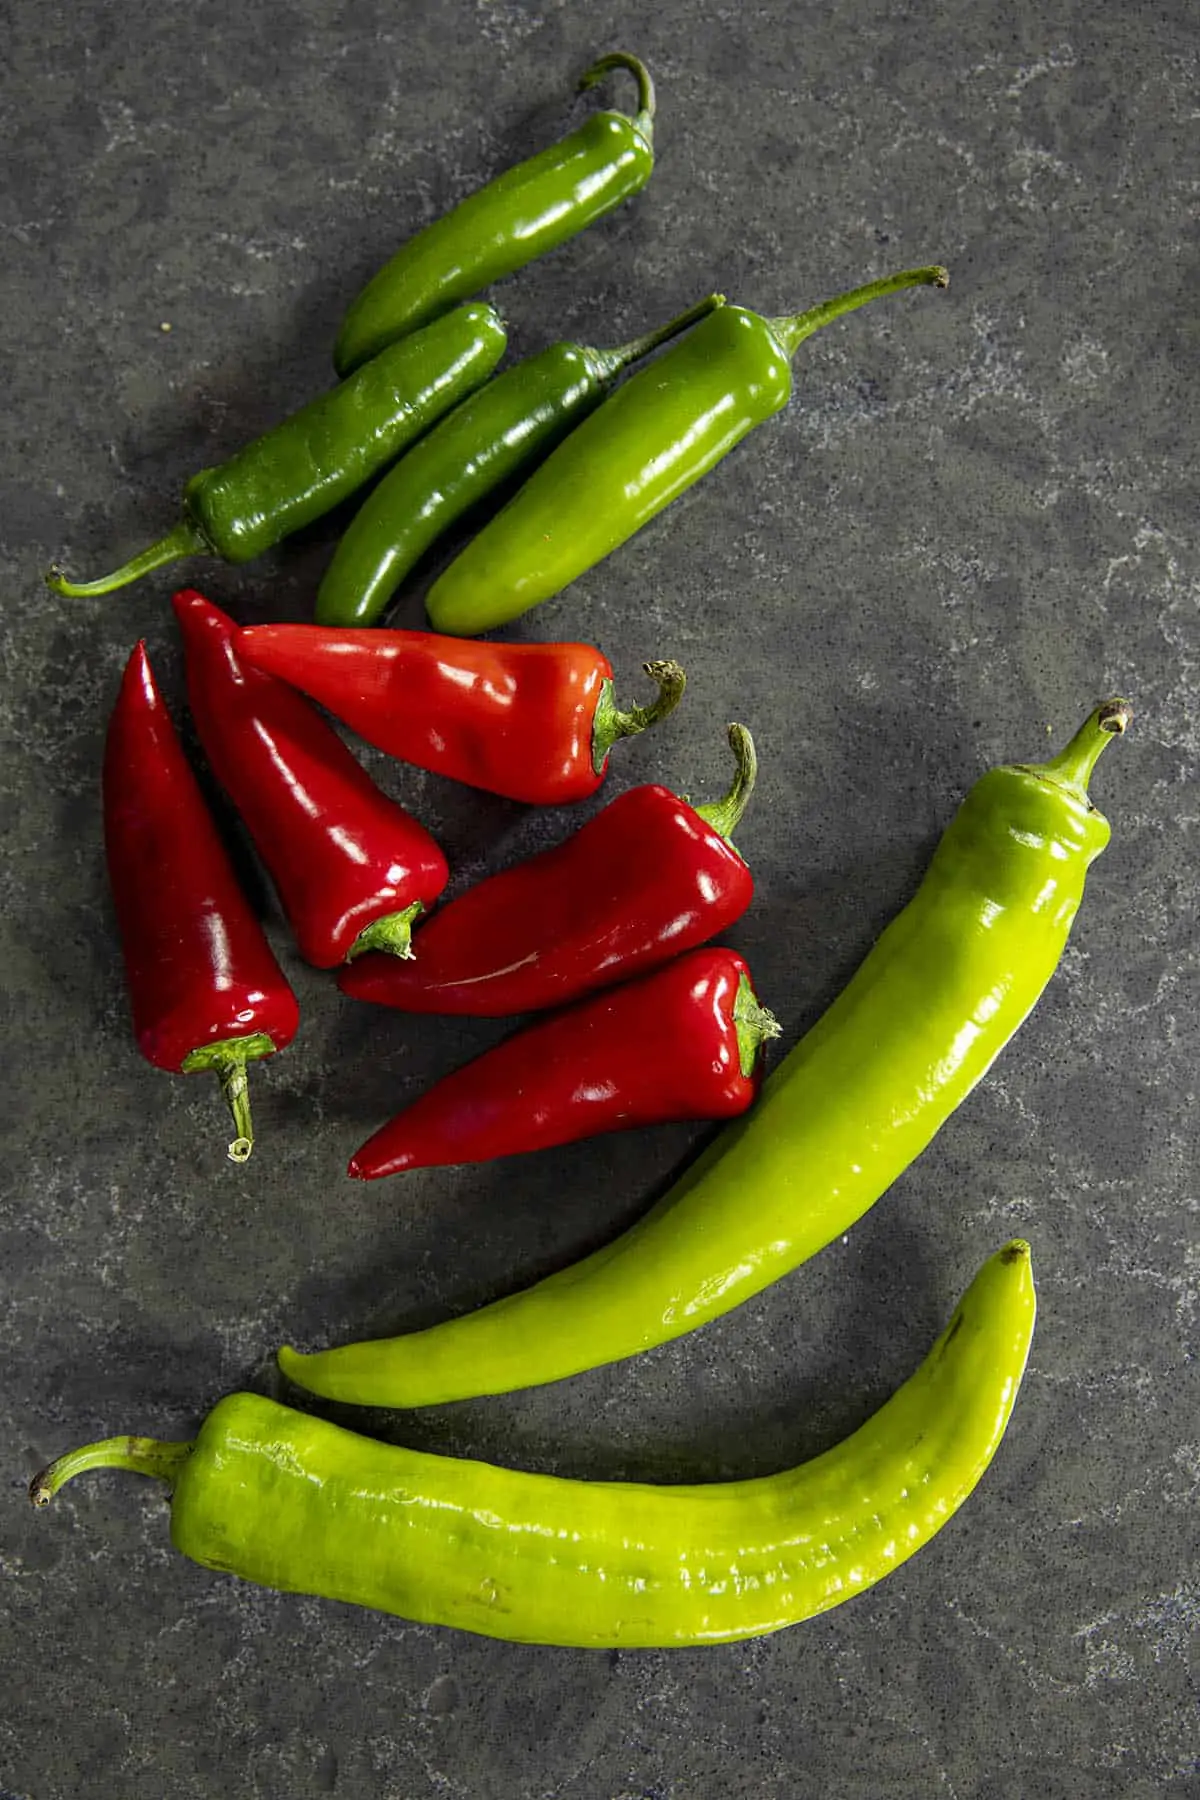 Hot peppers for making pepper relish